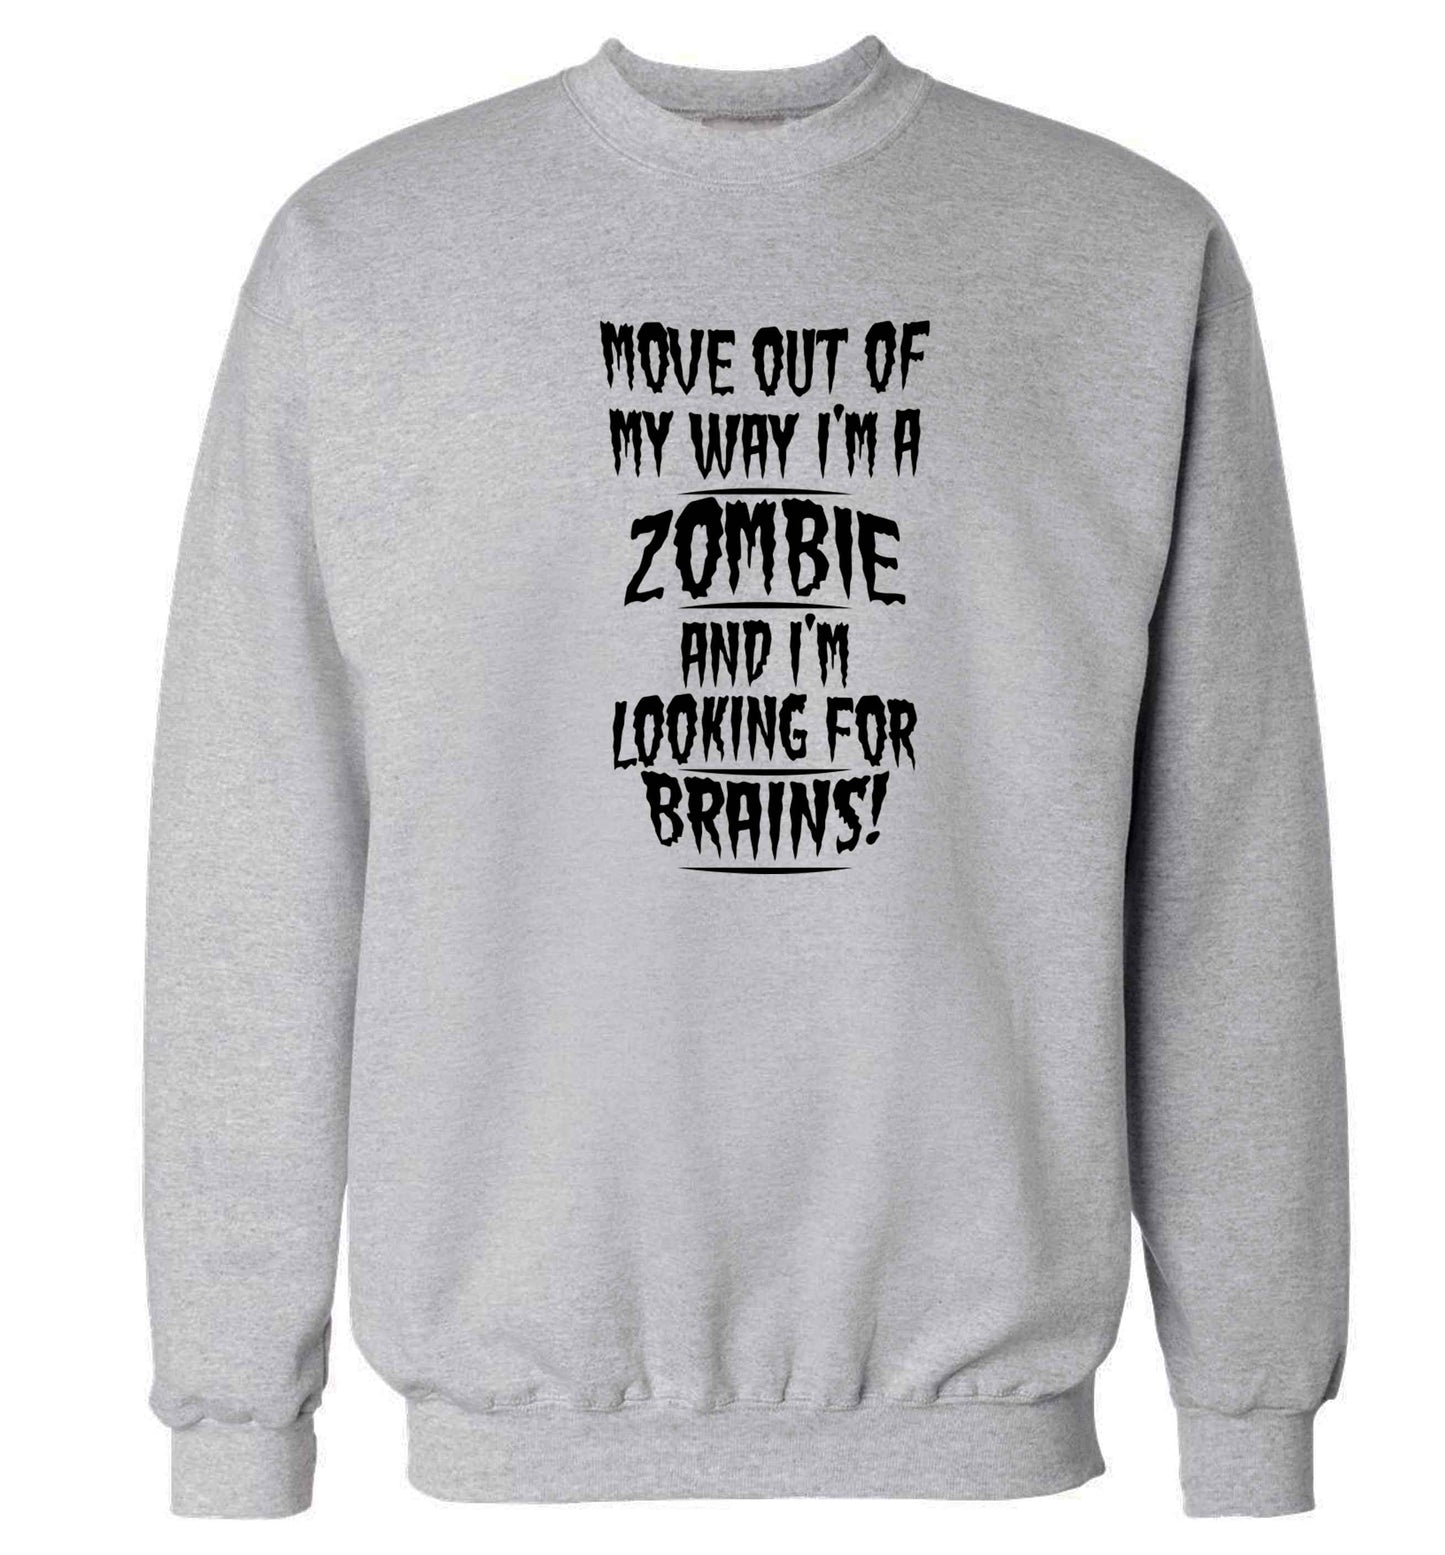 I'm a zombie and I'm looking for brains! Adult's unisex grey Sweater 2XL